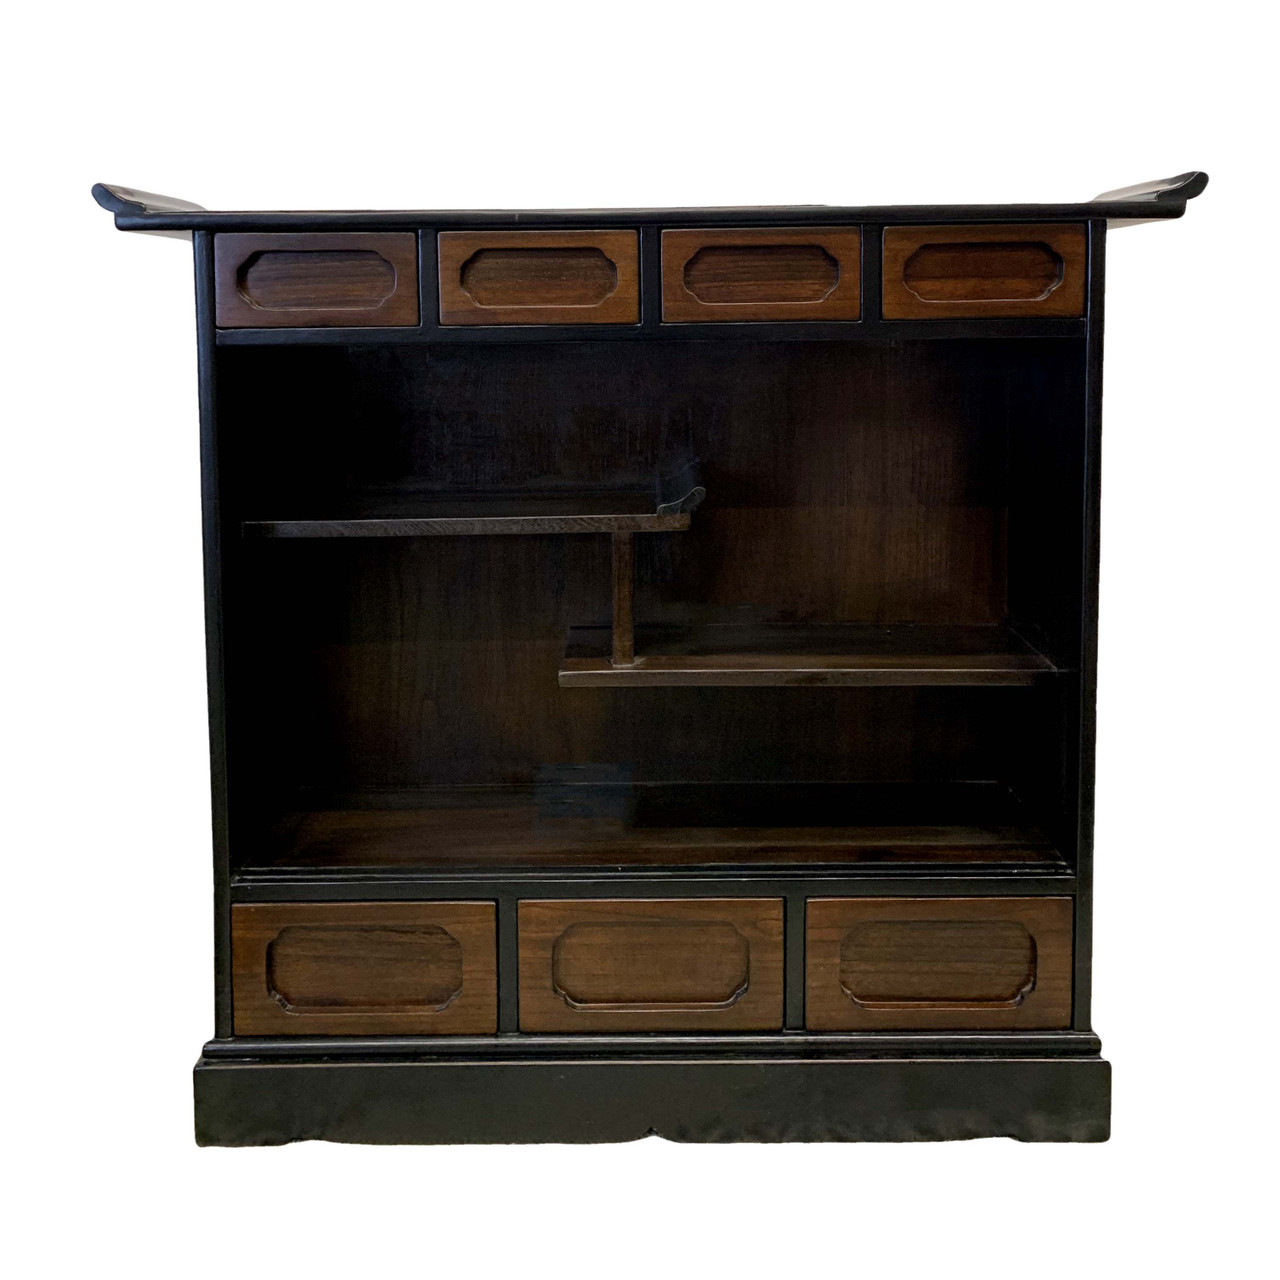 Japanese Wooden Curio Cabinet - Oriental Furniture Warehouse: Chinese &  Asian Styles